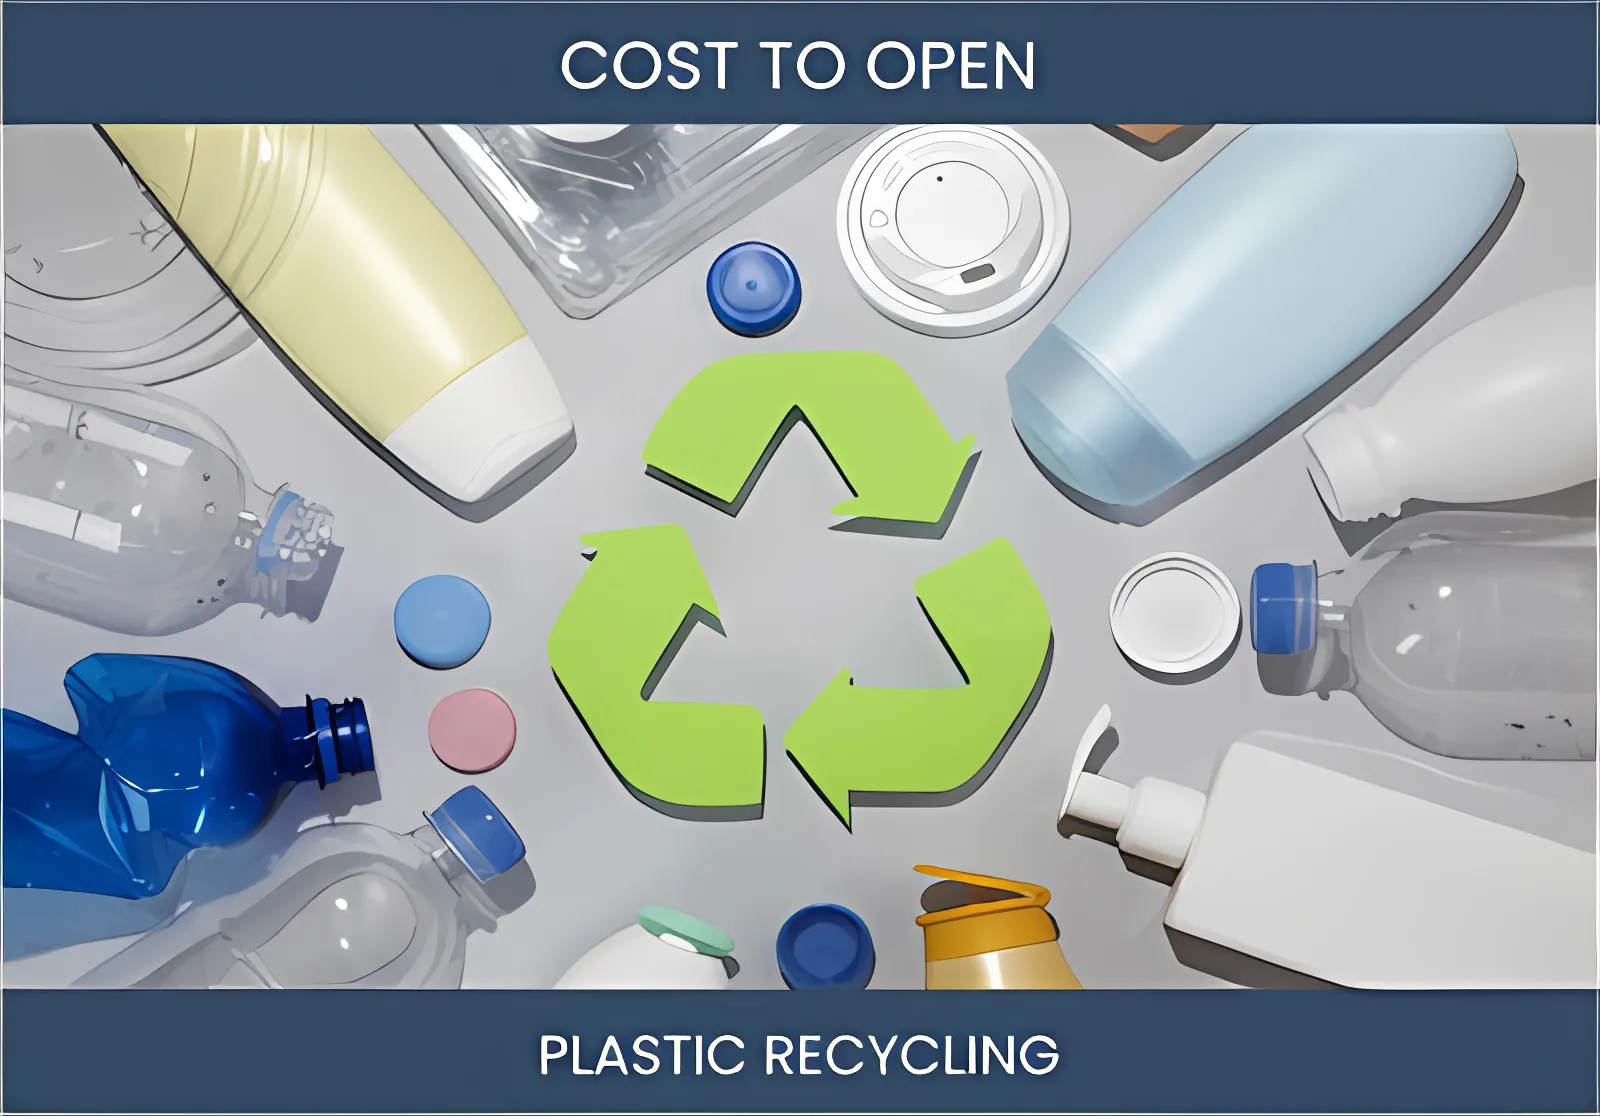 What is the cost associated with starting a plastic recycling venture